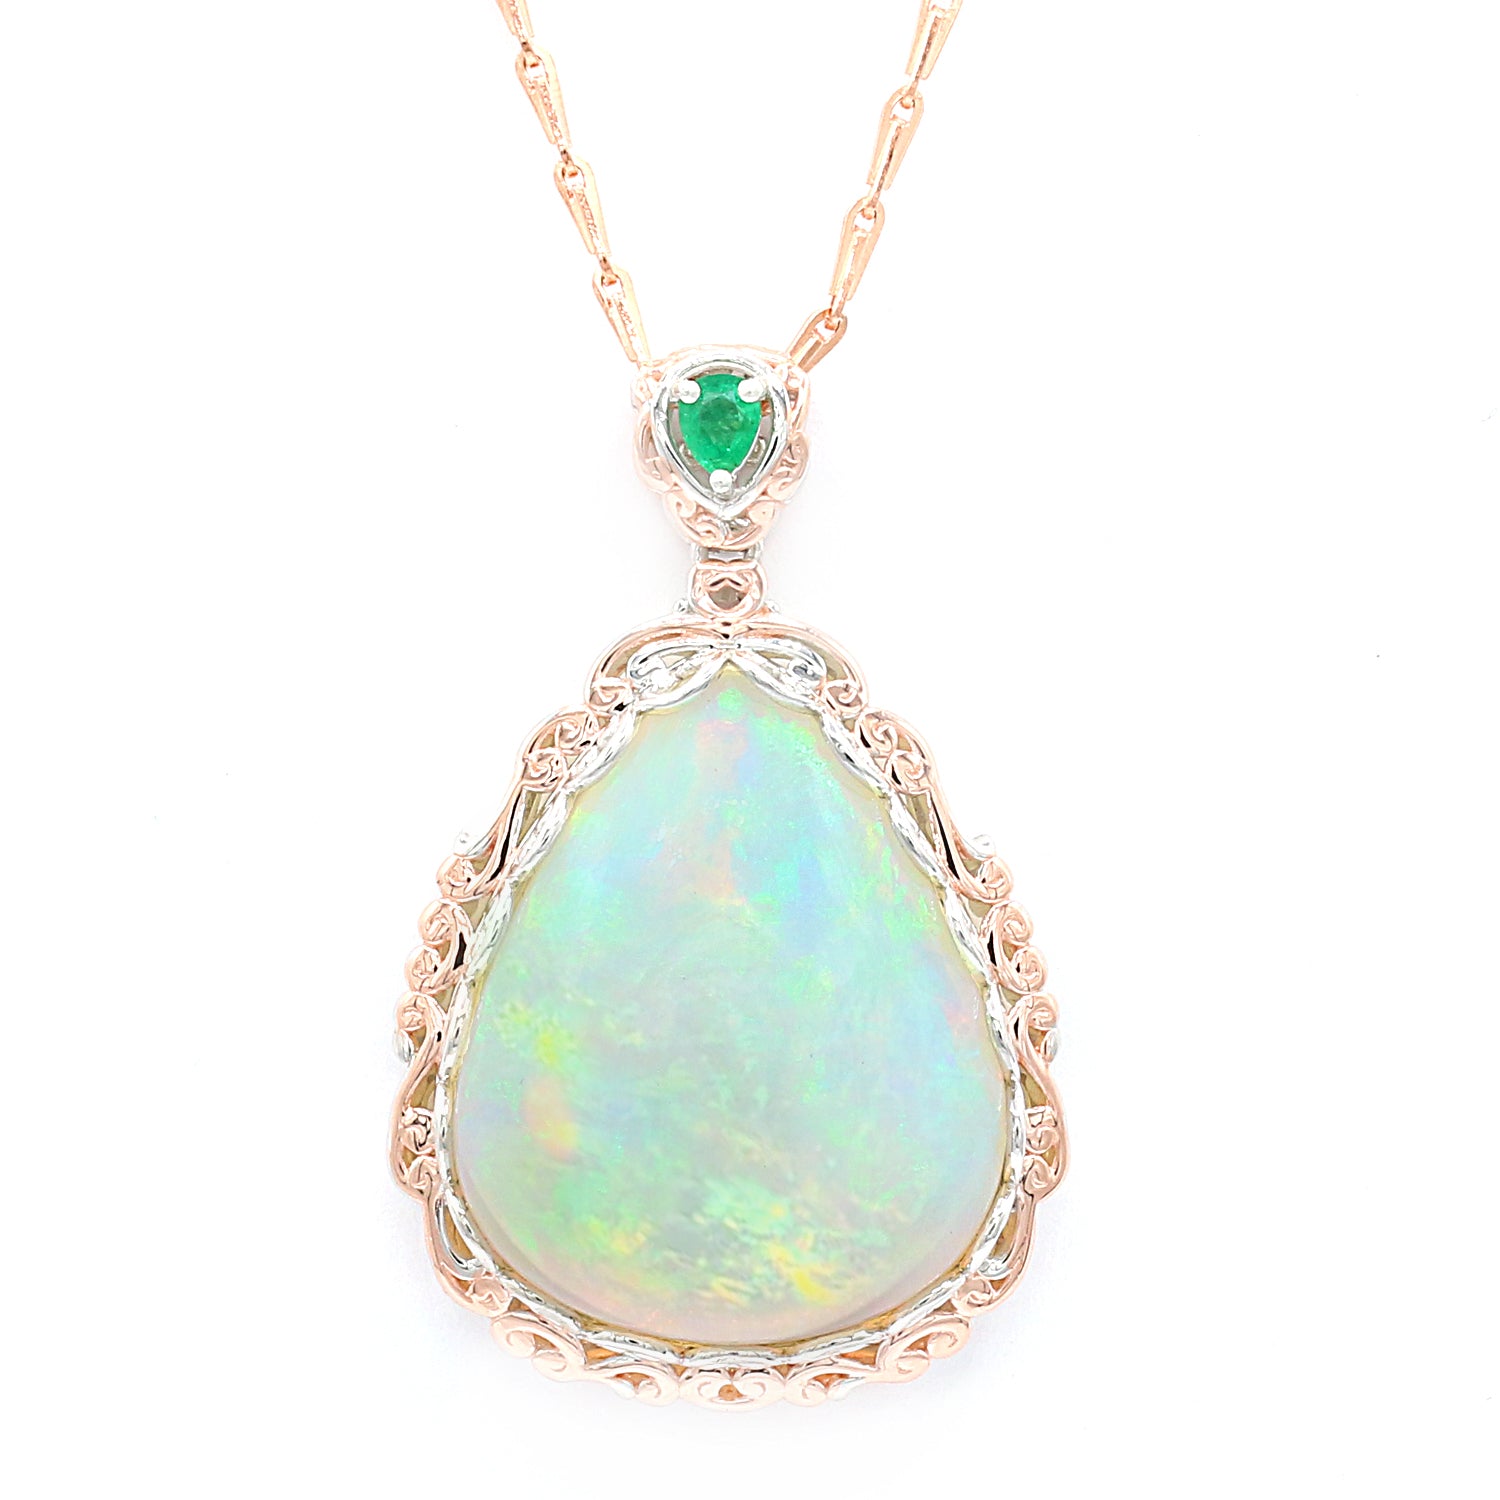 Limited Edition Gems en Vogue Luxe, One-of-a-Kind 22.74ctw Ethiopian Opal & Emerald Pendant